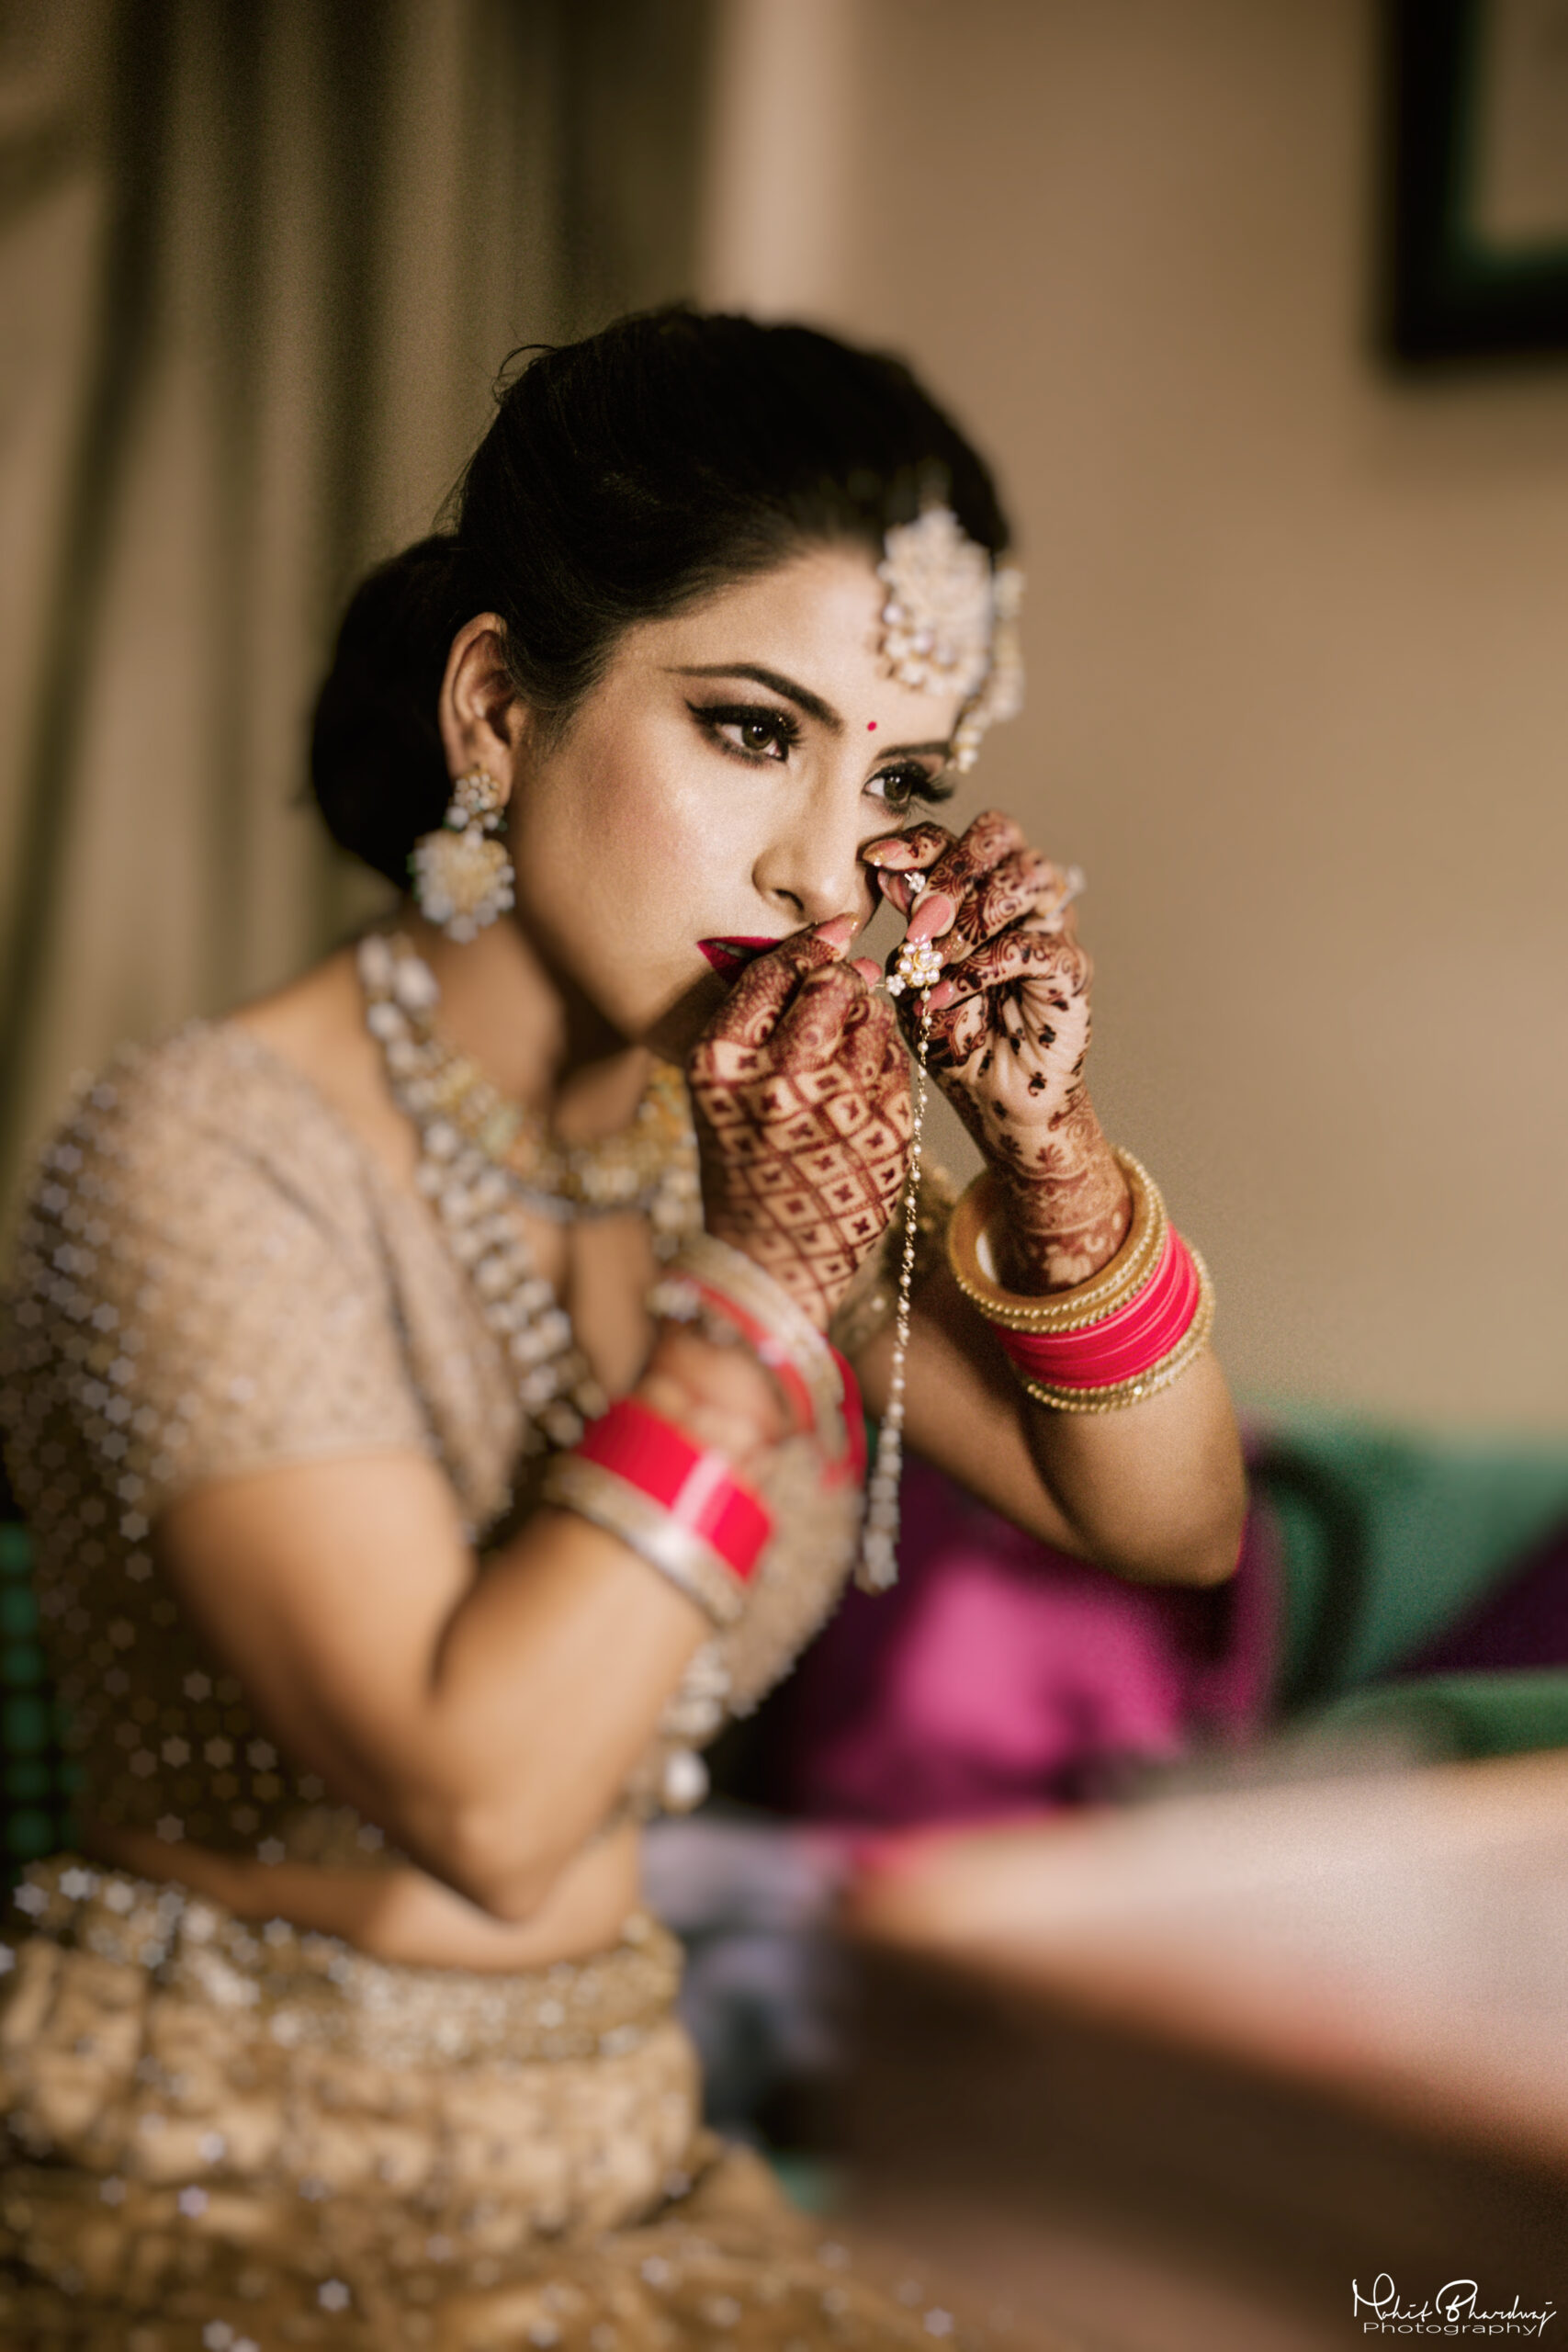 Premium Photo | A bride poses for a photo in her traditional bridal gown.